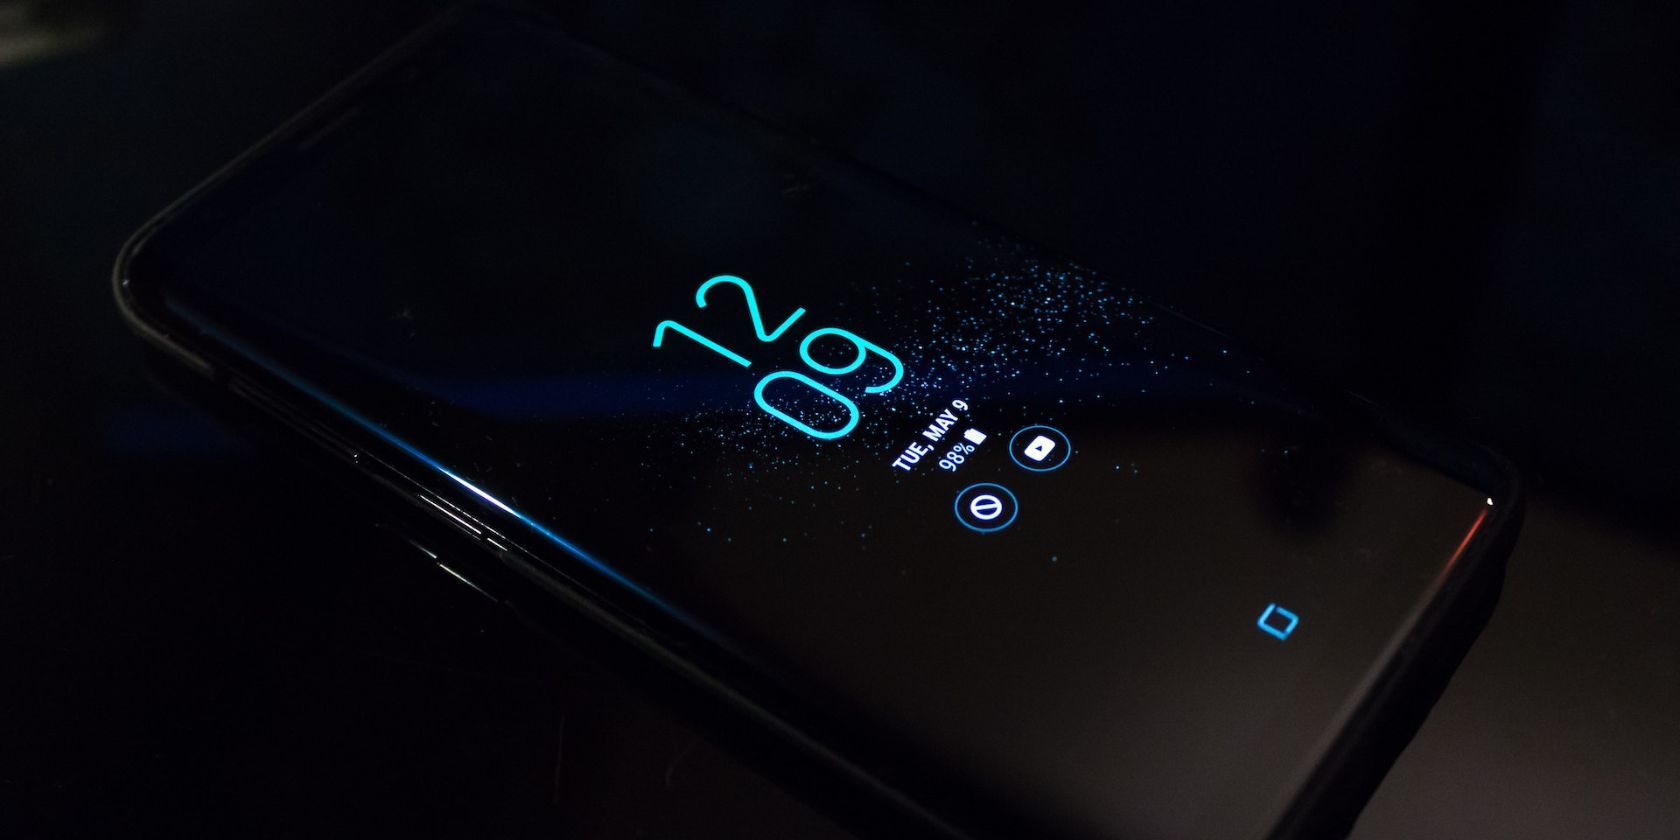 Android phone in the dark